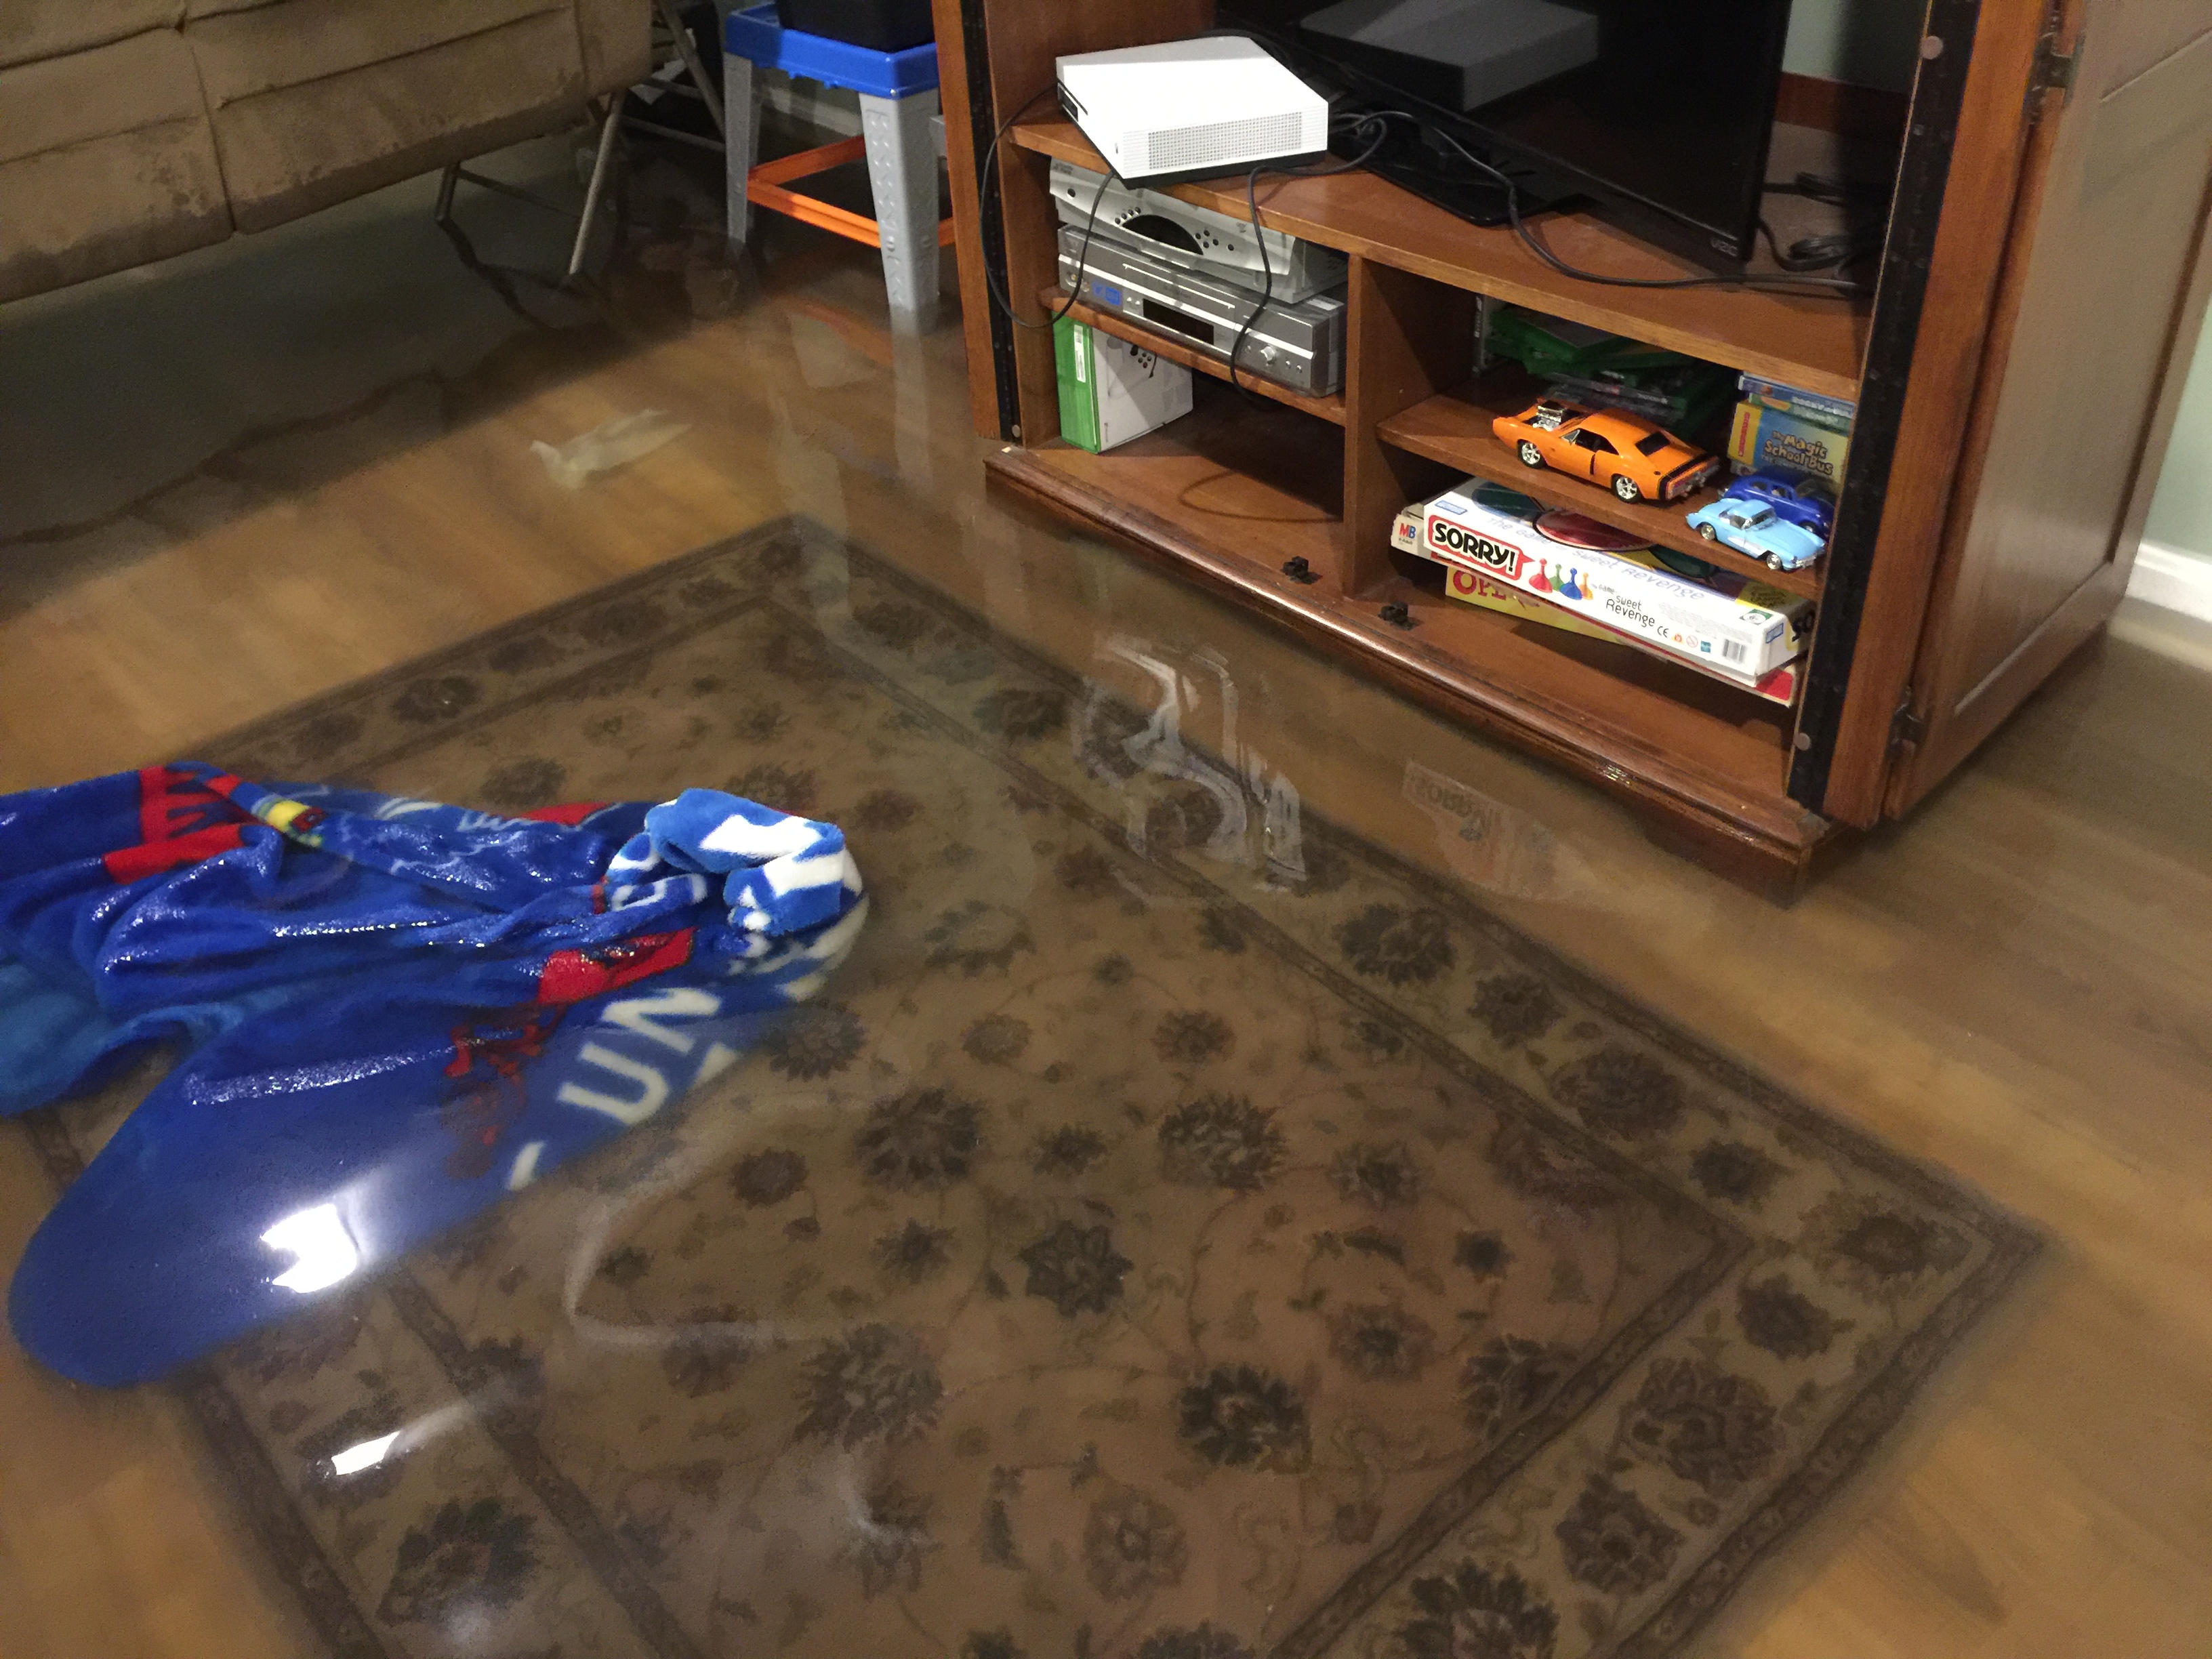 Flooding is a recent reality for our local residents. Call SERVPRO of Leawood/Overland Park for flood damage clean up.